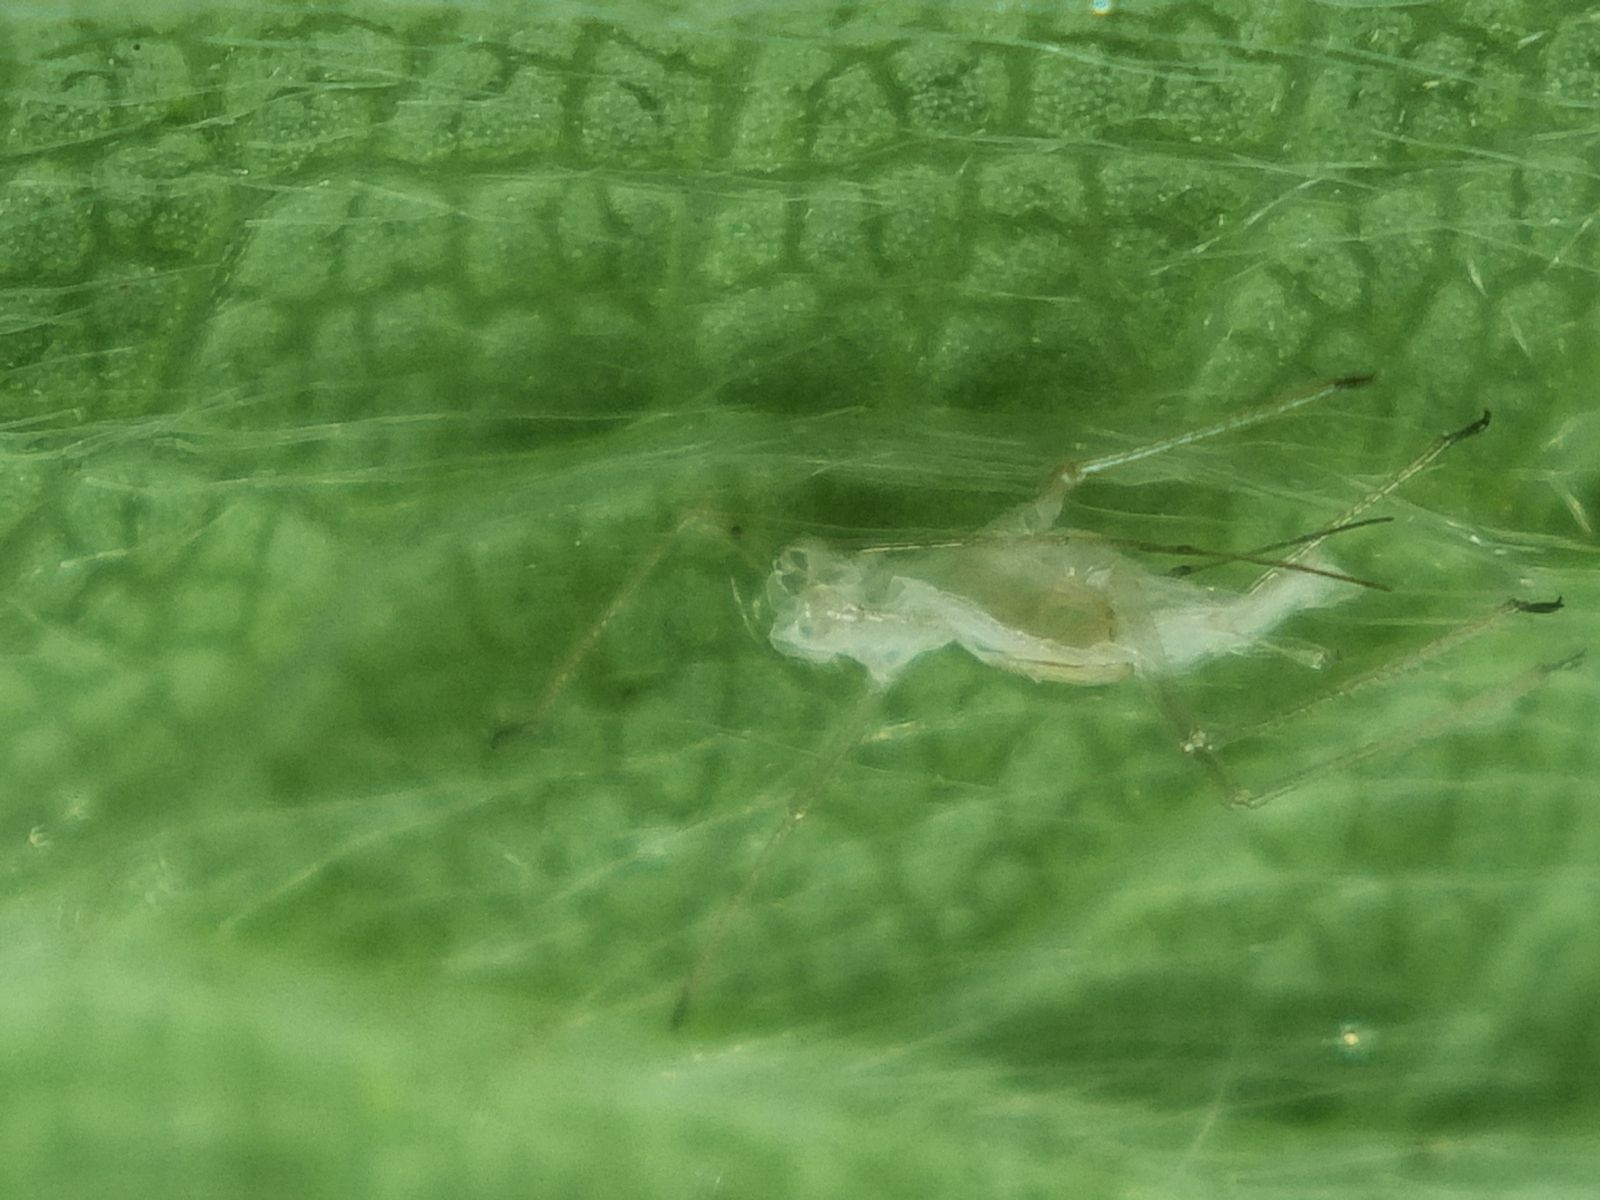 Aphid remains after aphidoletes consumption